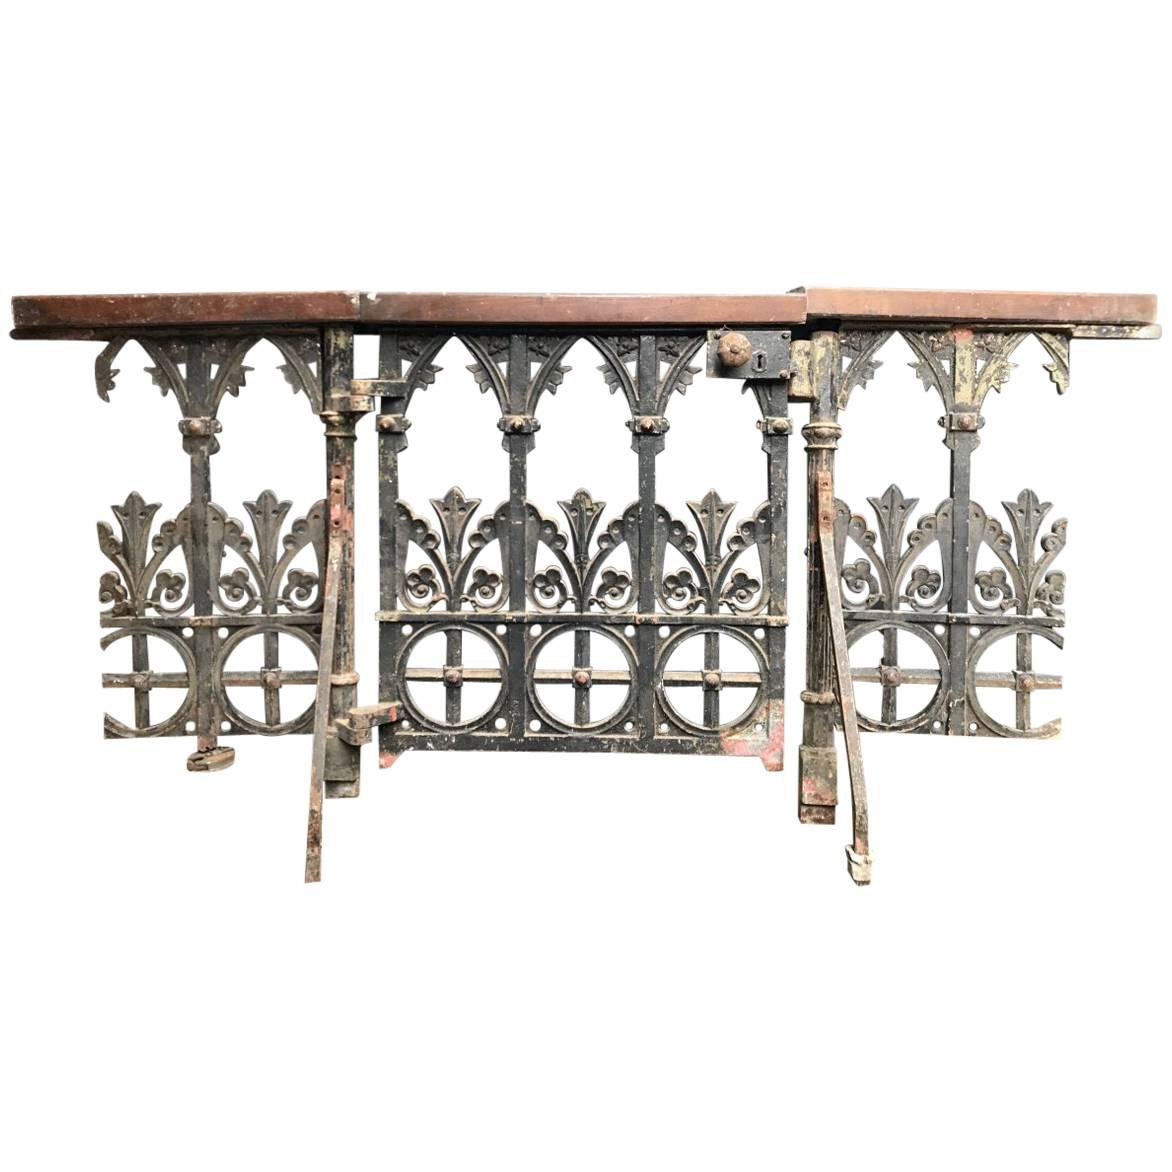 Gothic Revival Cast Iron Gate with Both Side Railings and Geometric Decoration